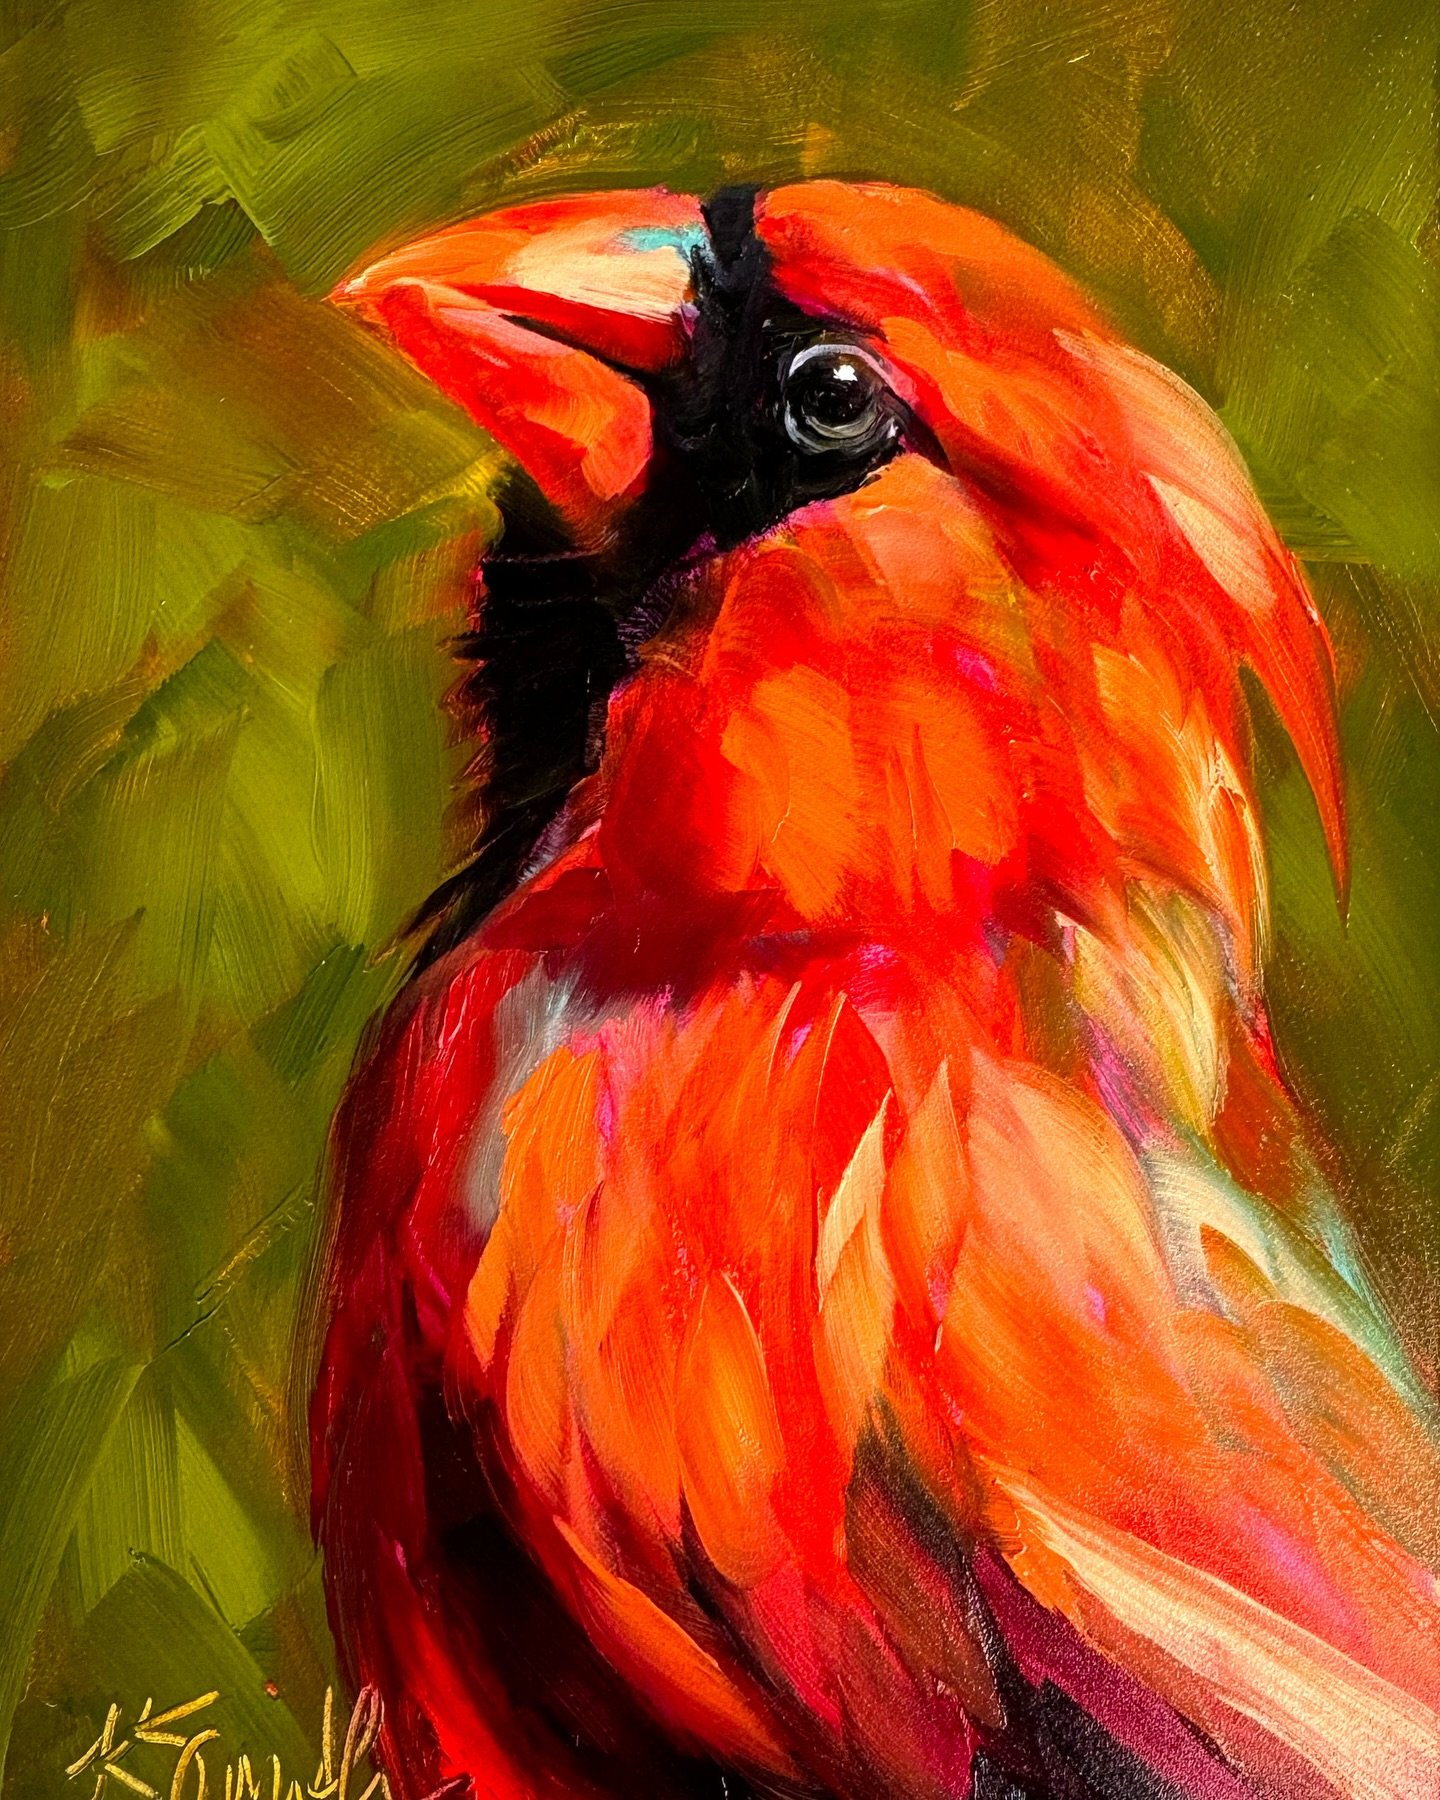 Meet Rico. He loves slow dancing and singing in the rain. 💕 This original oil painting is 6&rdquo;x8&rdquo; on a raised panel. Available, #dowhatyoulove #inspiringart #cardinal #birdofinstagram #creativelifehappylife #artistsoninstagram